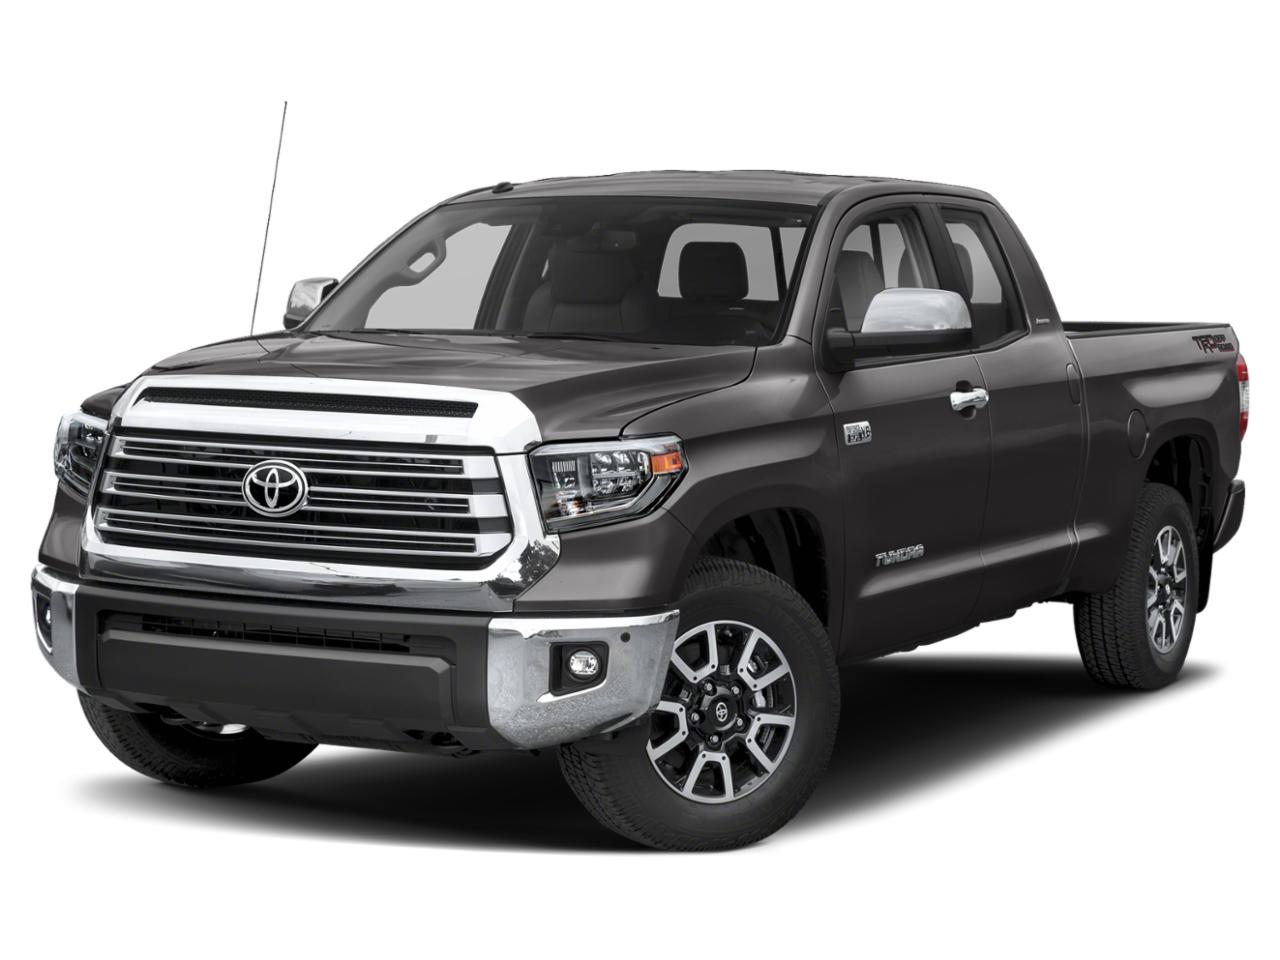 2018 Toyota Tundra 4WD Vehicle Photo in WEST CHESTER, PA 19382-4976